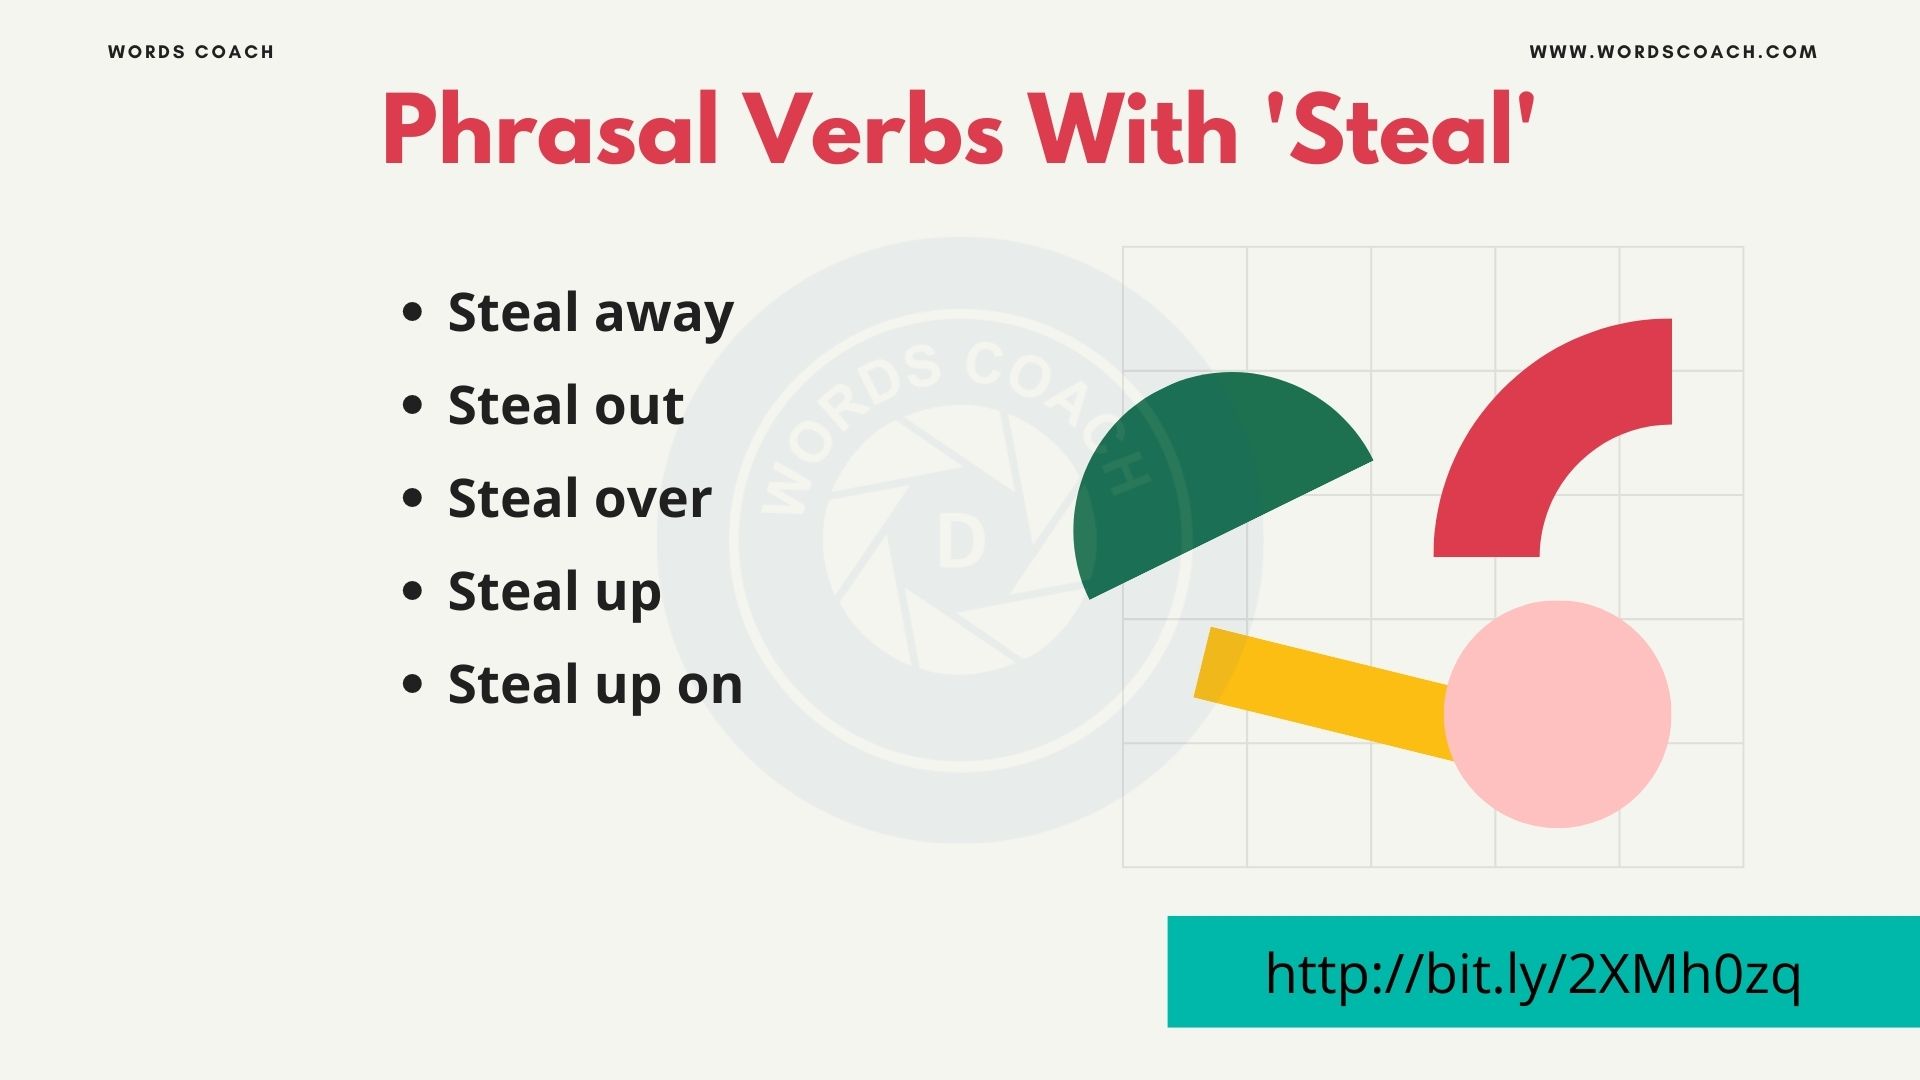 Phrasal Verbs With 'Steal' - wordscoach.com